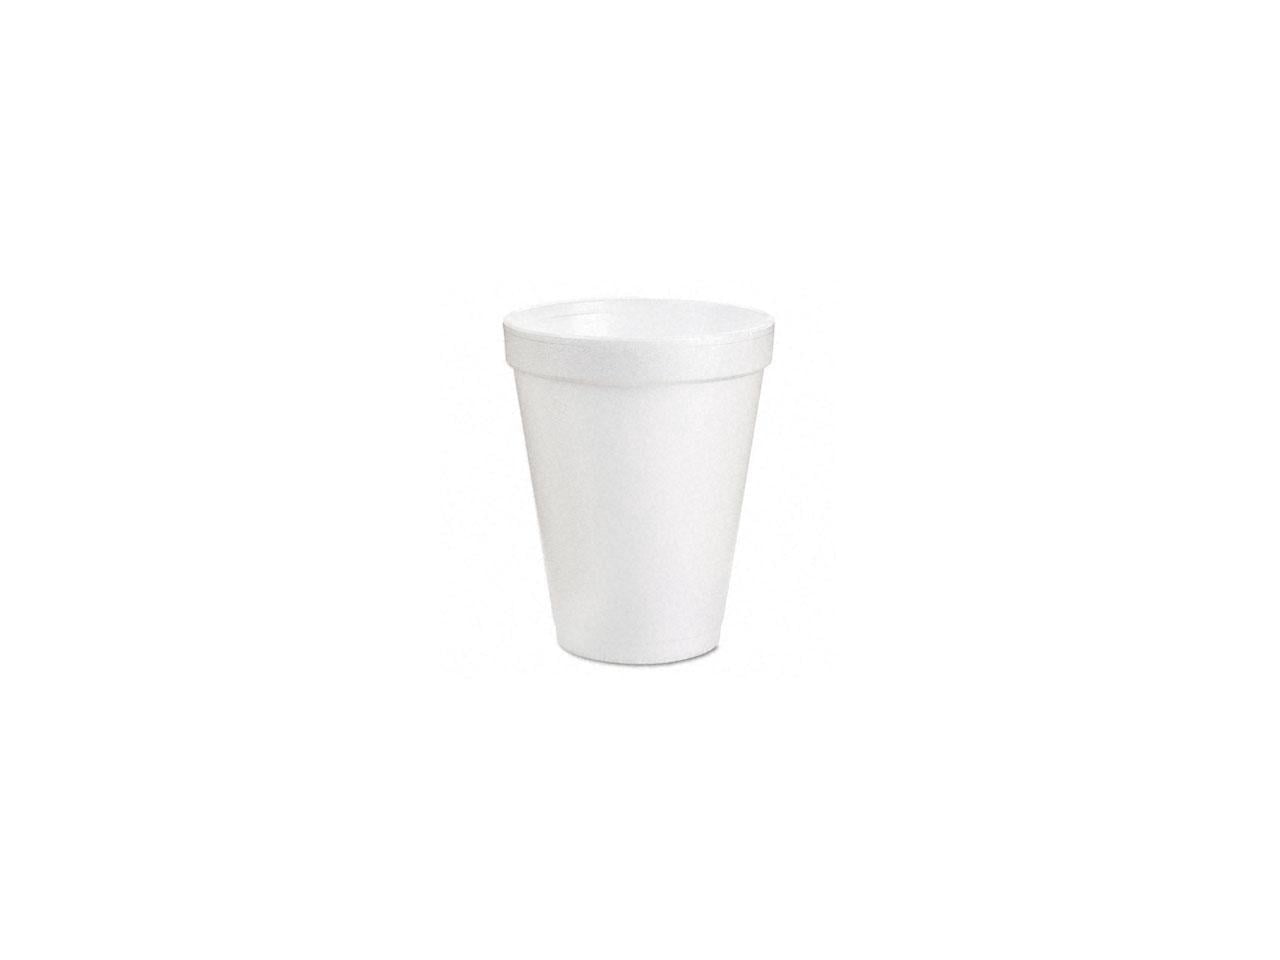 6 Oz Styrofoam Cups - Crazy About Cups